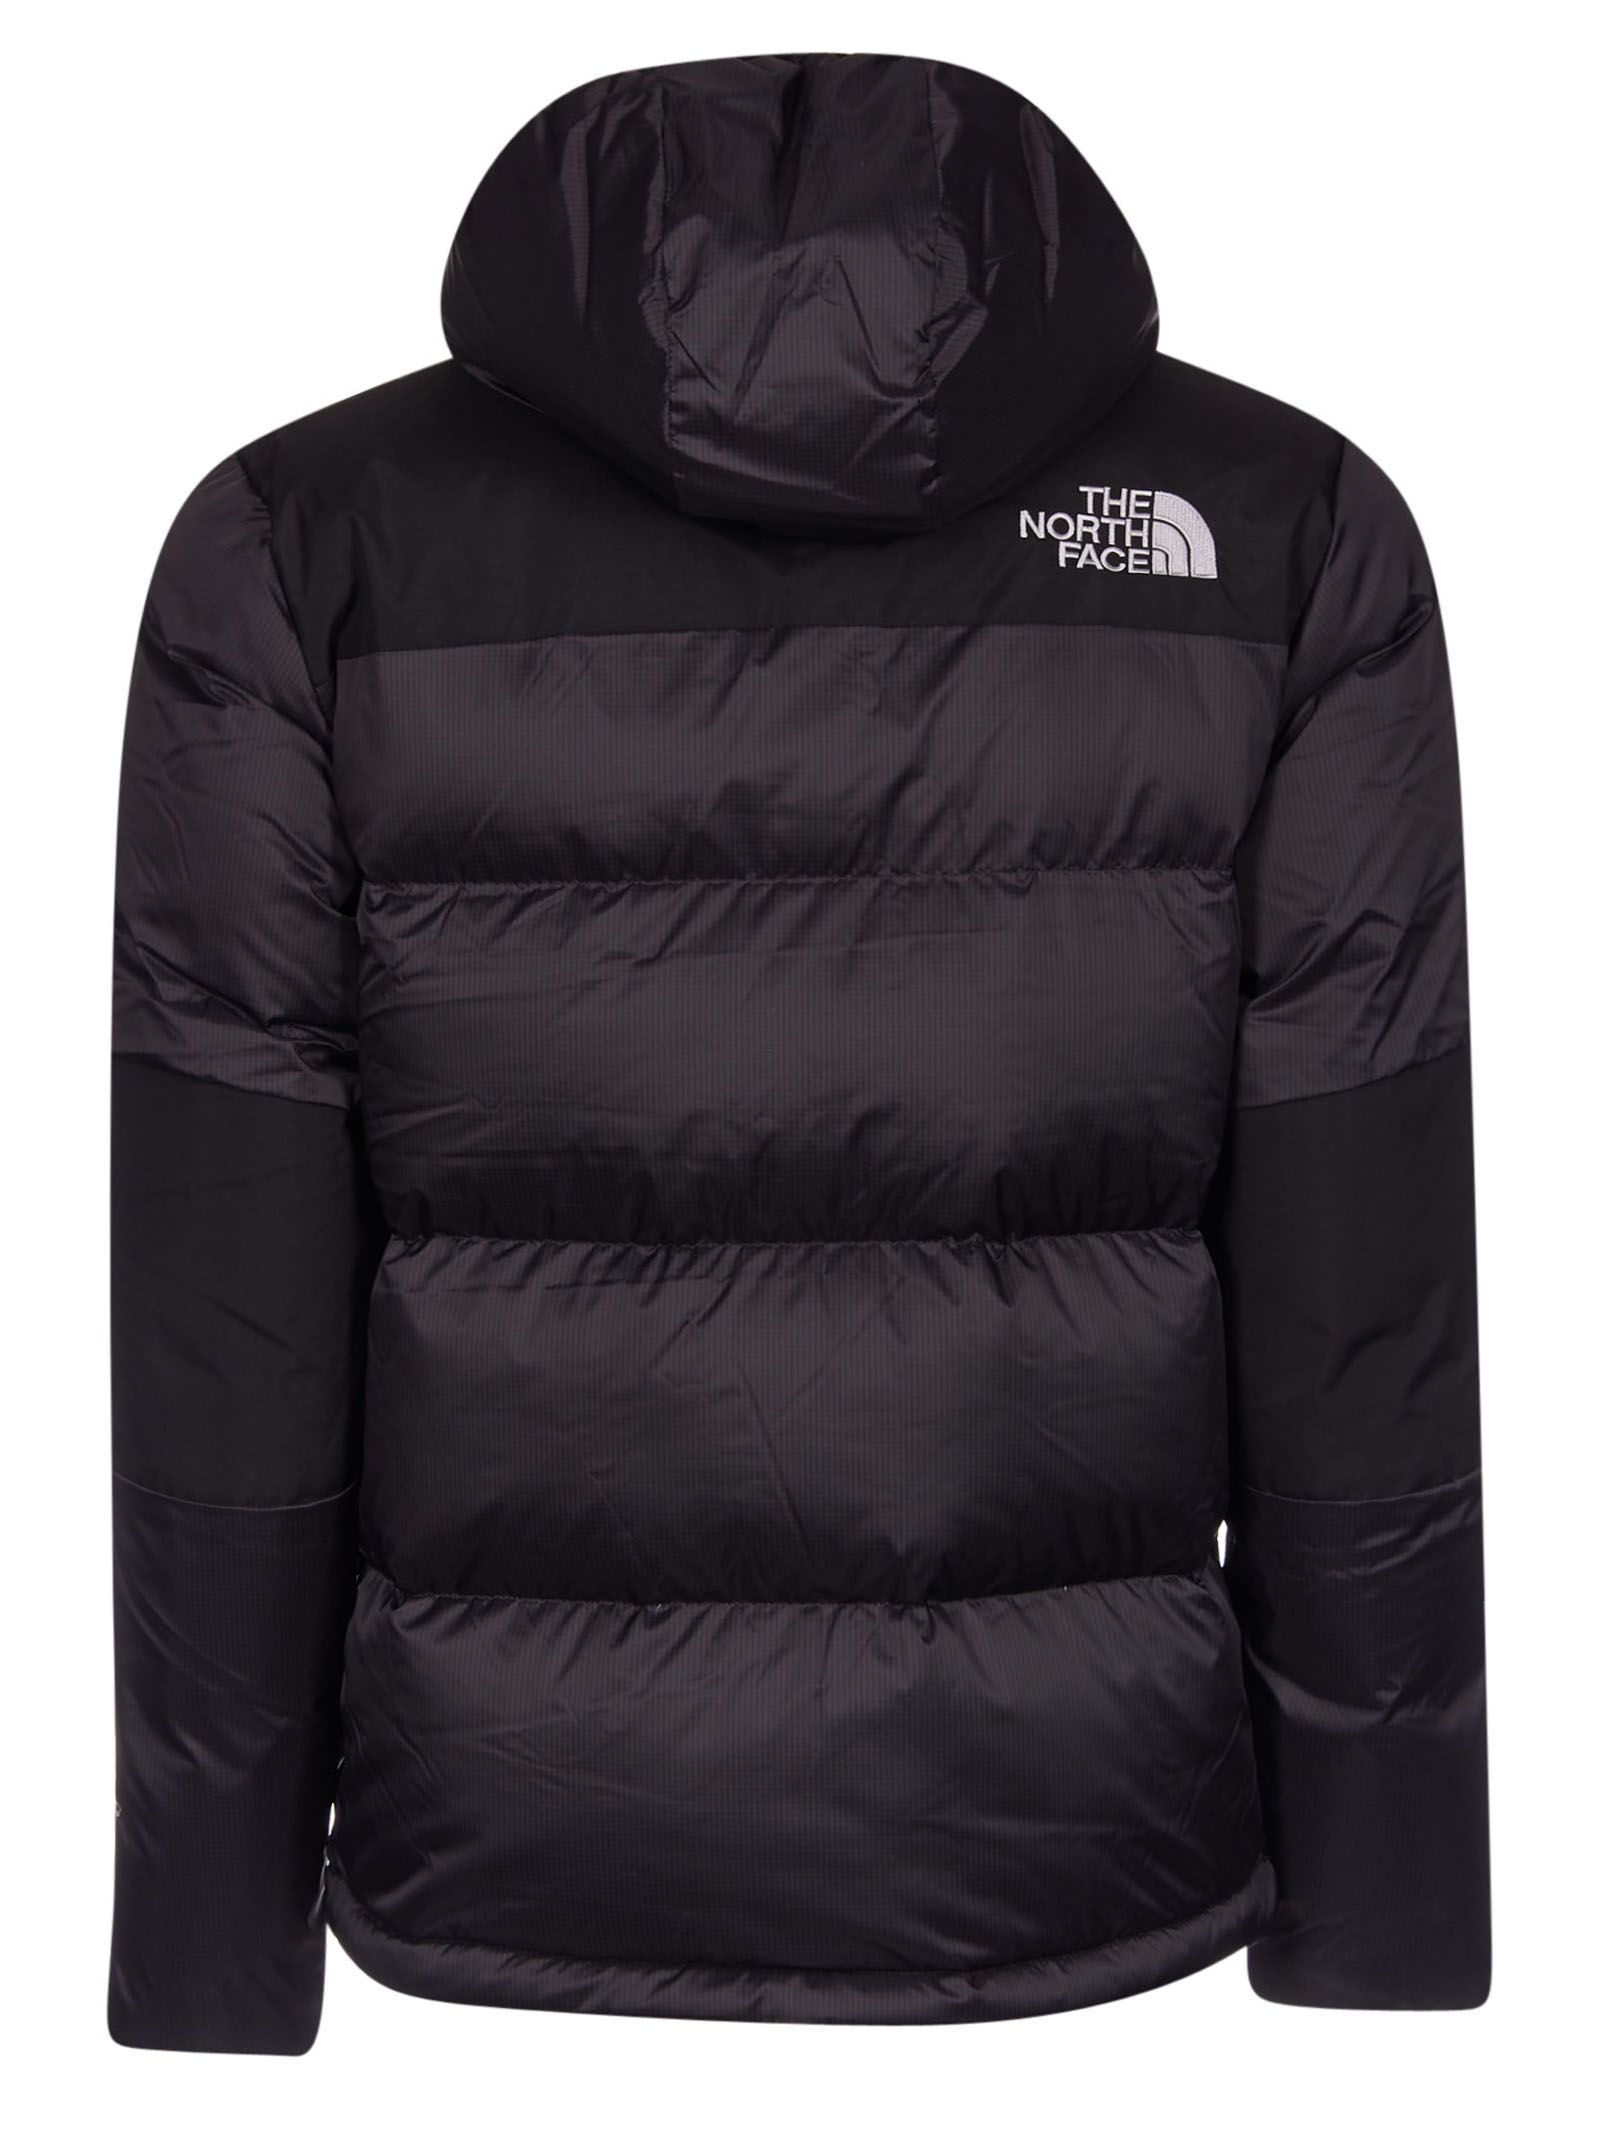 The North Face The North Face Logo Padded Jacket - Black - 10724738 ...